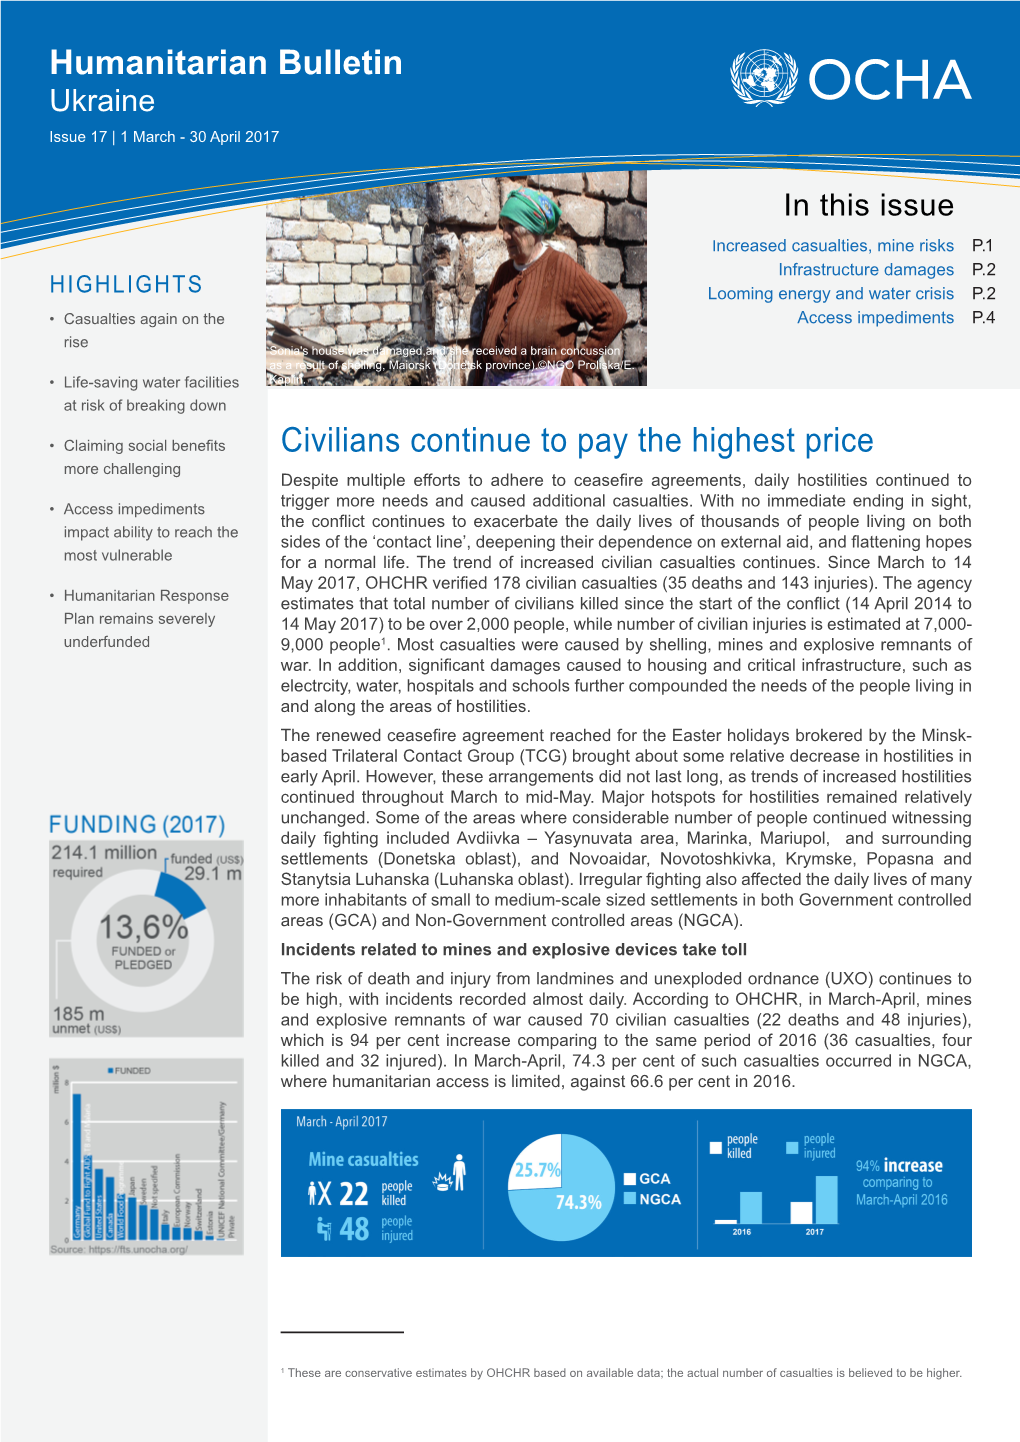 Civilians Continue to Pay the Highest Price Humanitarian Bulletin